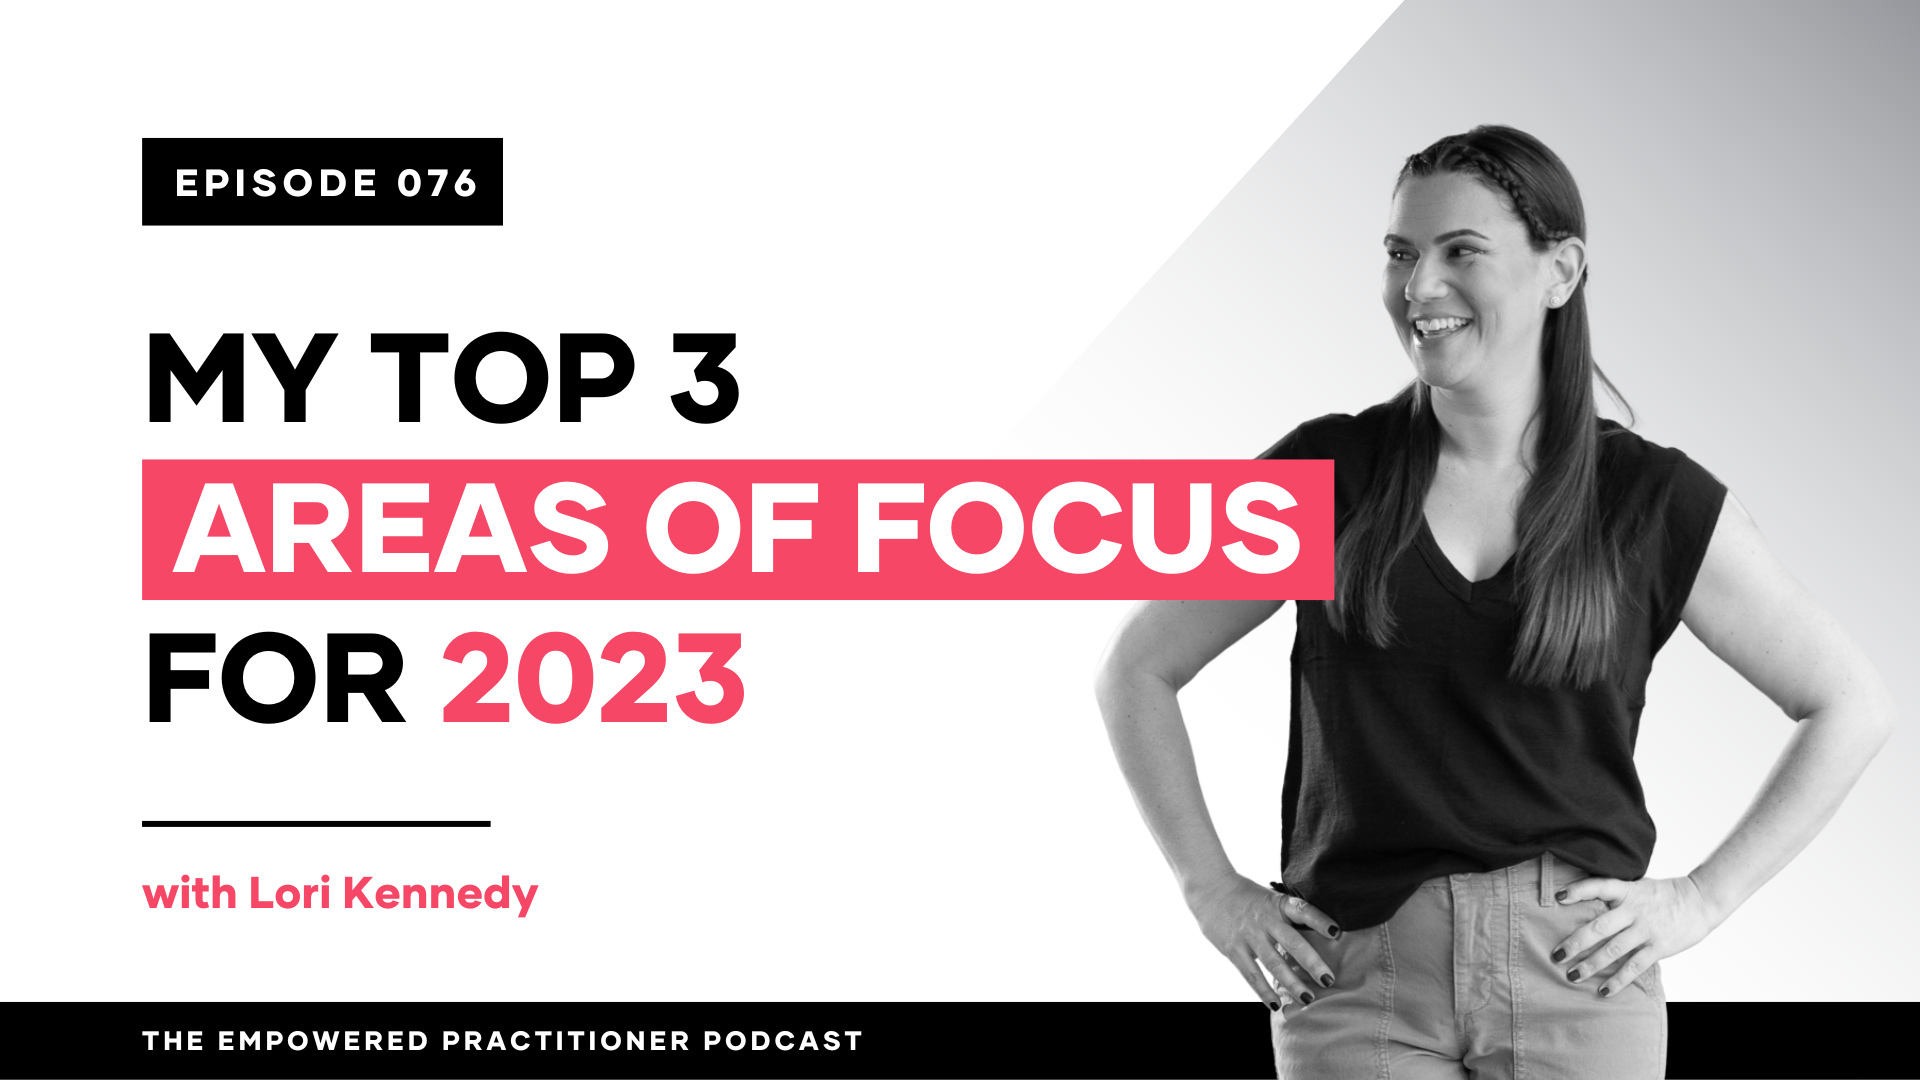 My Top 3 Areas OF Focus For 2023